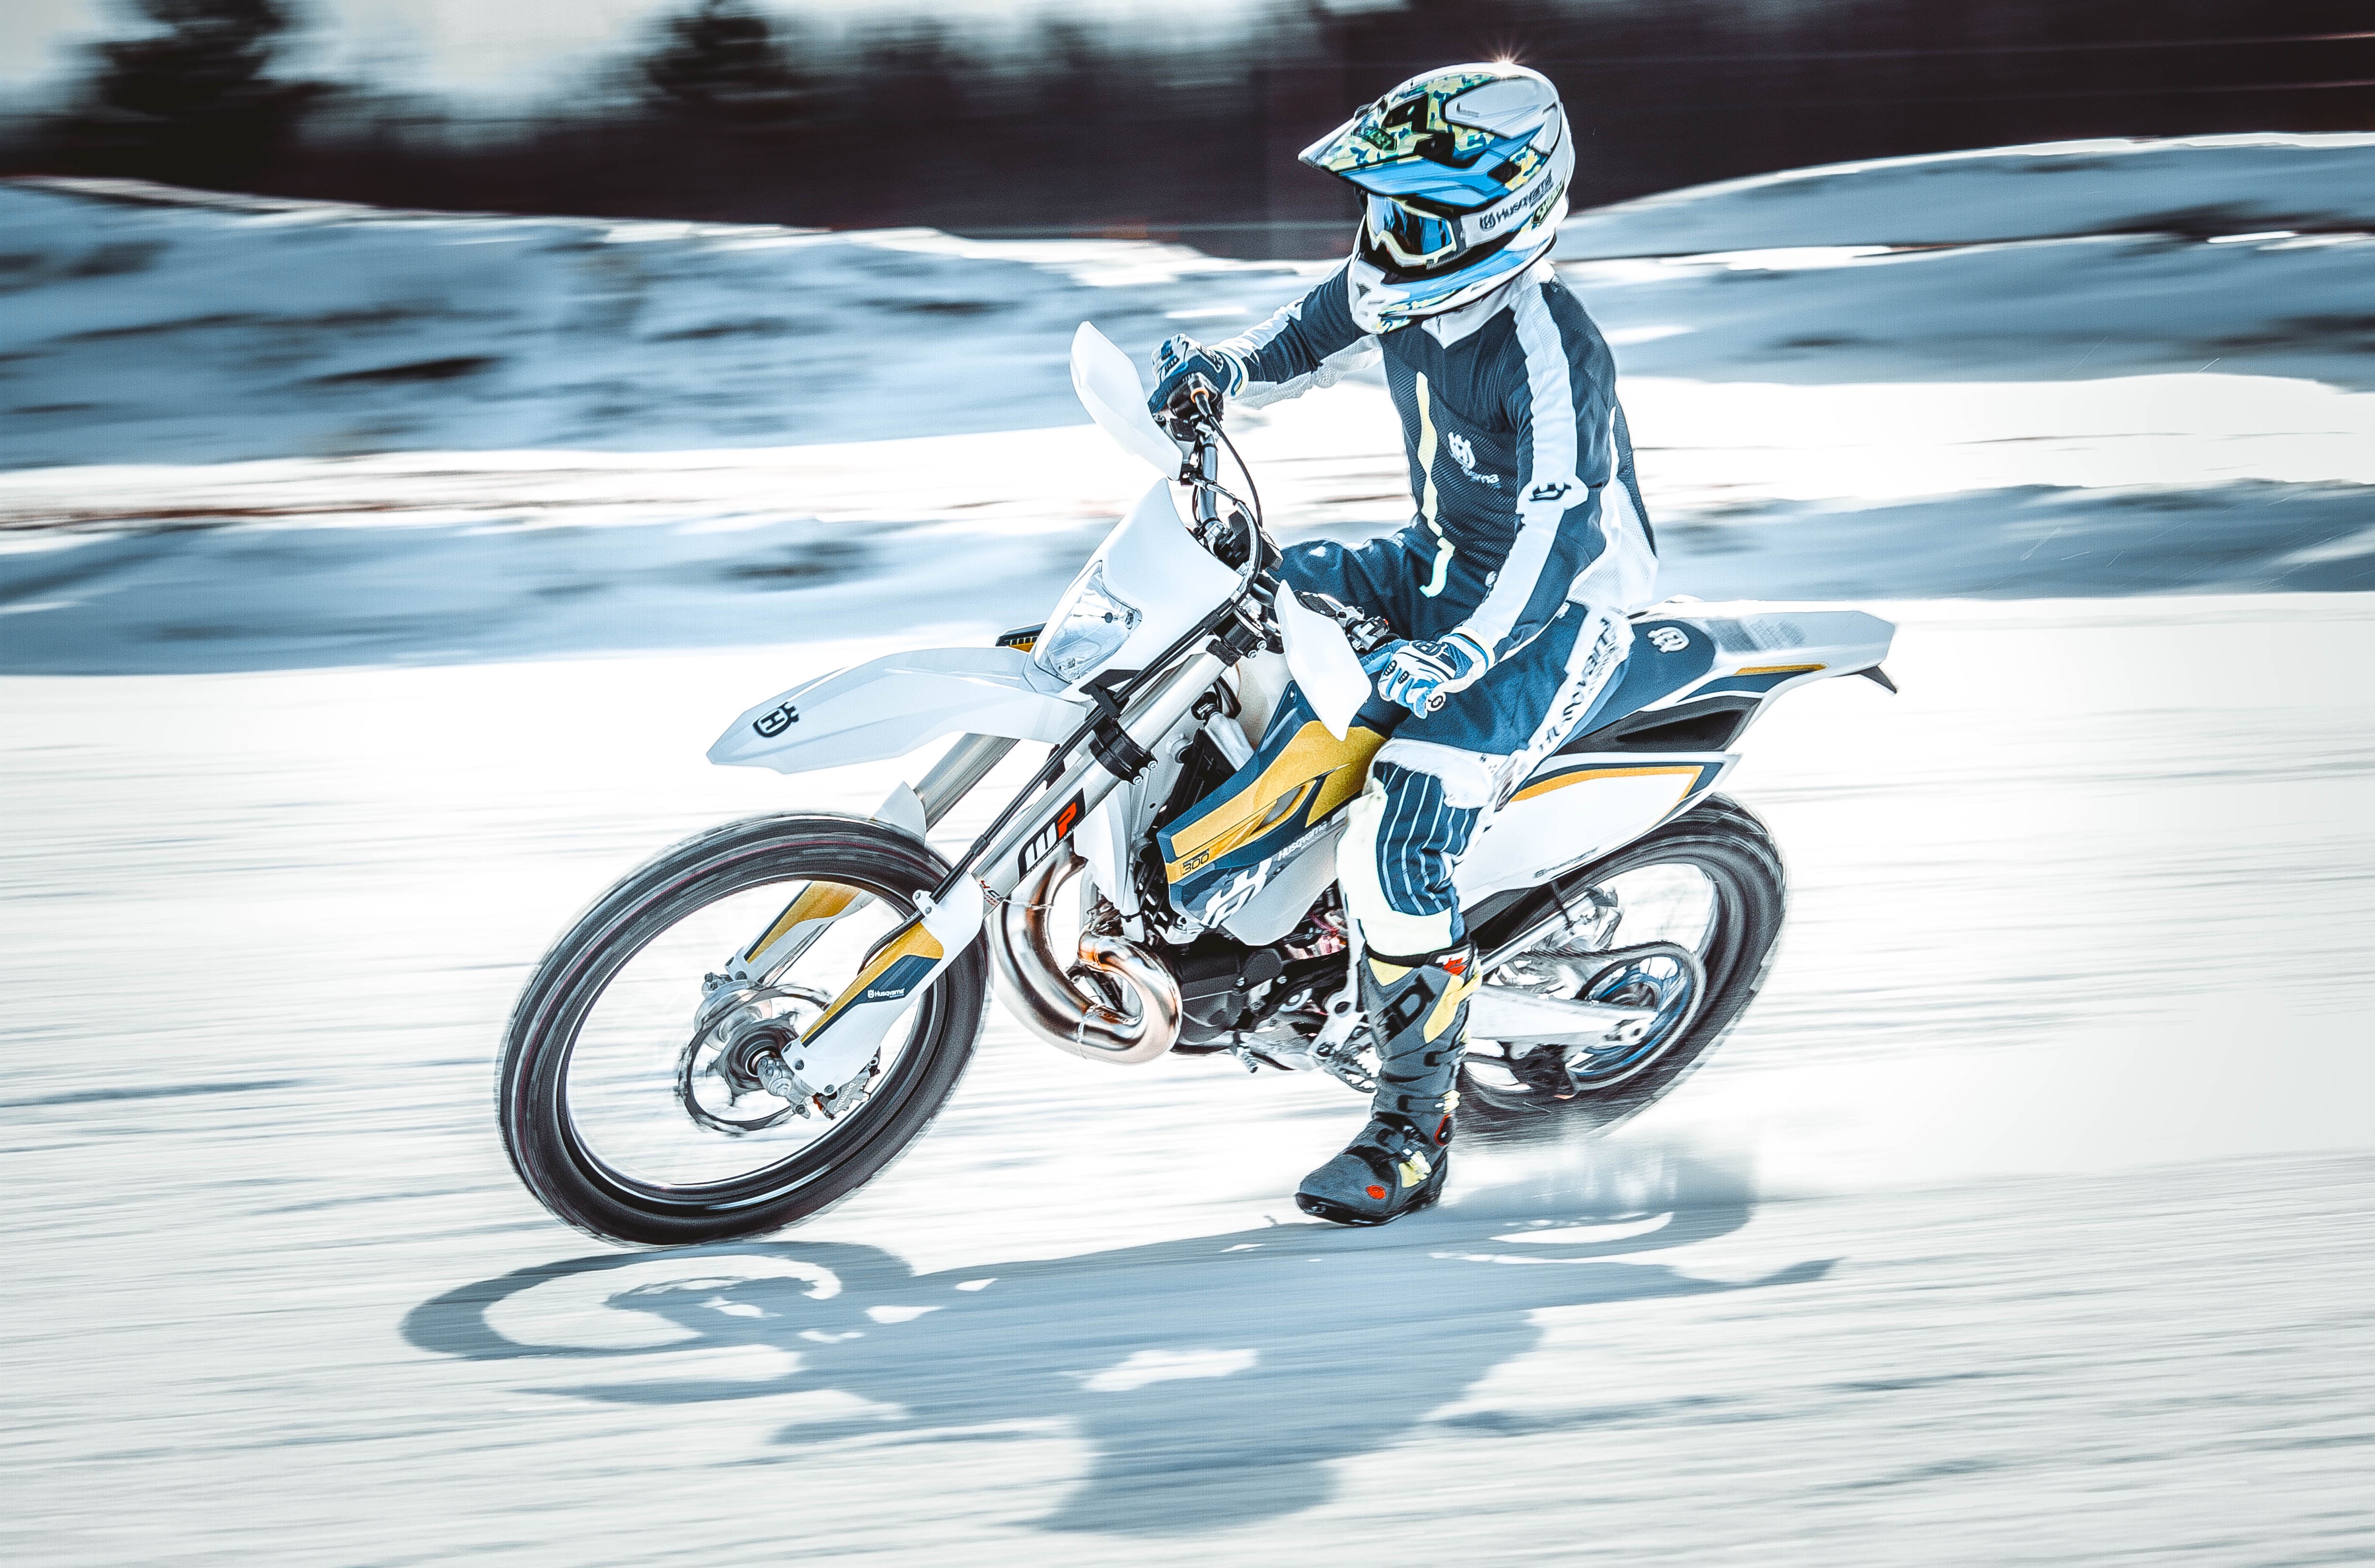 snow, motorcycles, motorcyclist, speed